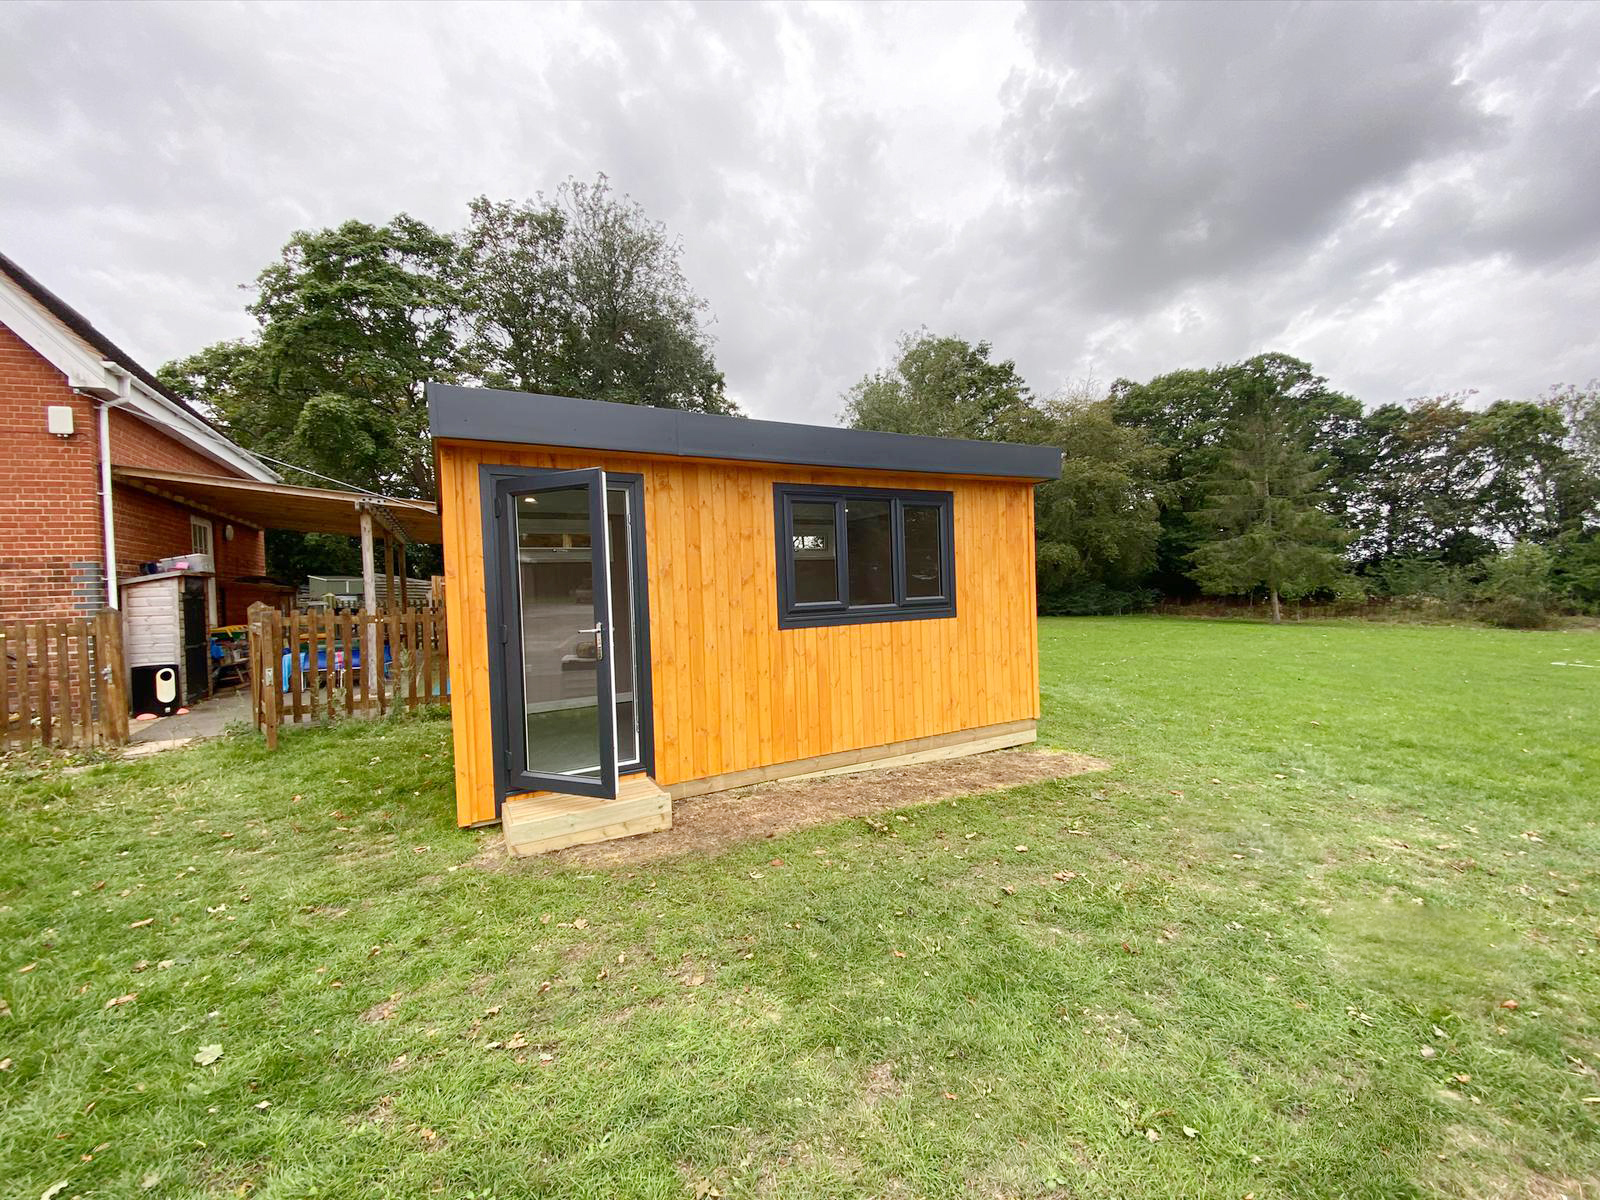 Cabins For Schools - Messing Primary 5m x 3m - Redwood - Andy,Adam,Josh_02